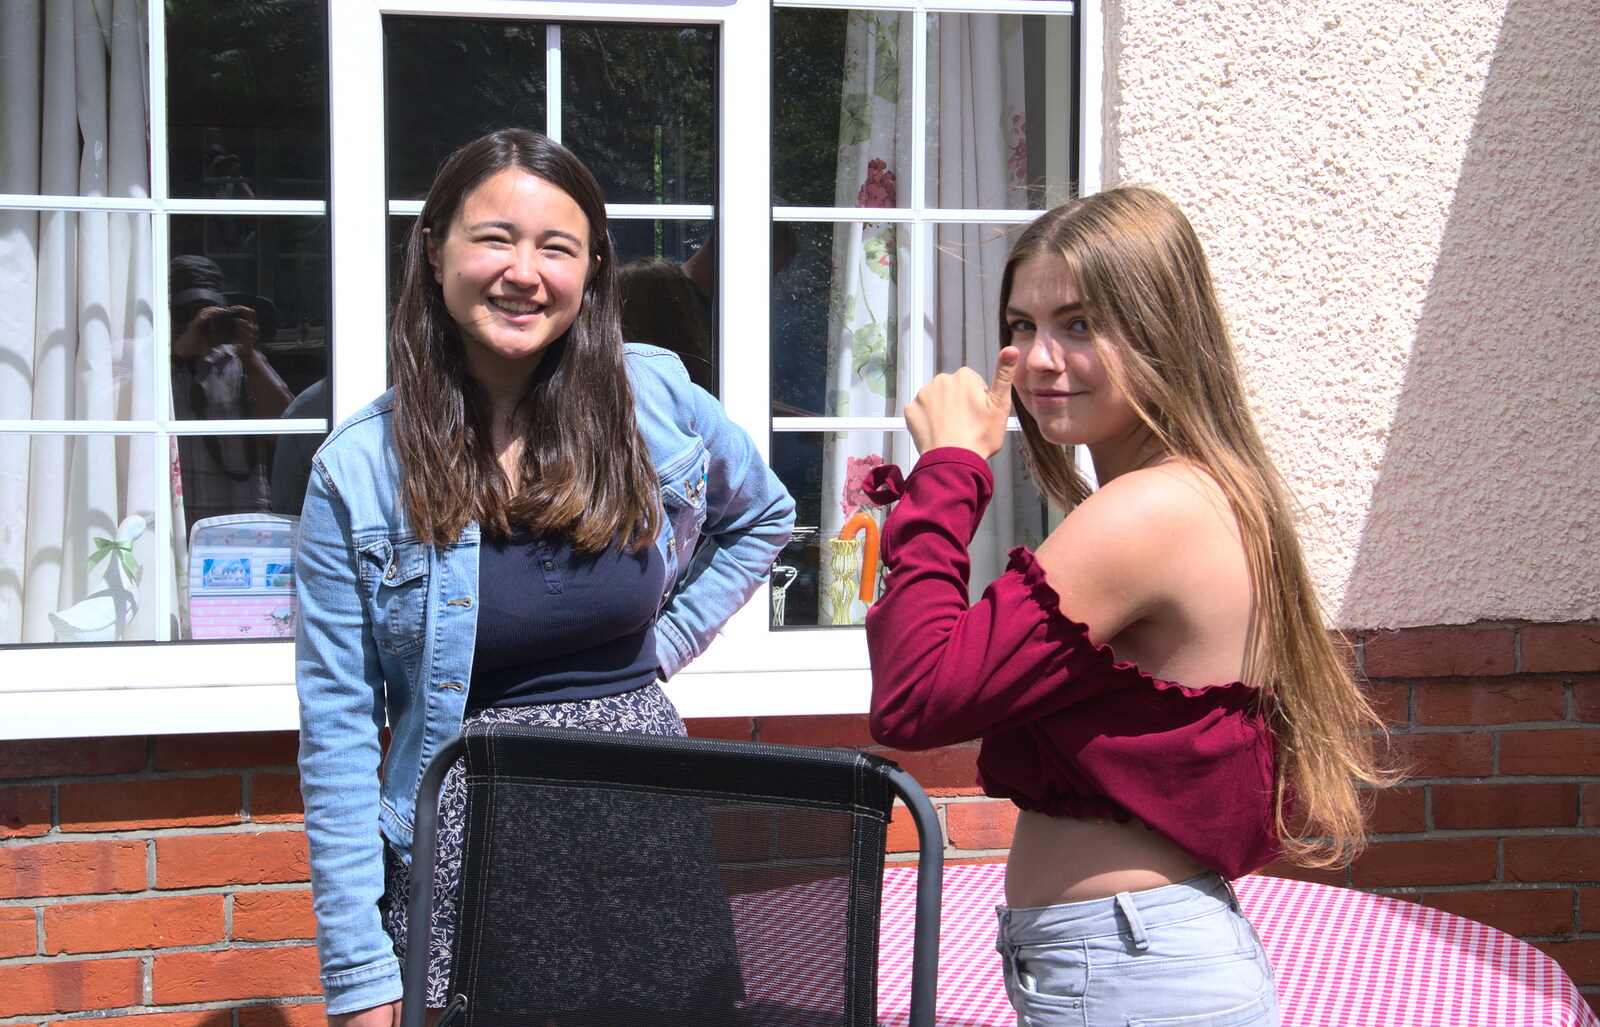 Hamish takes a photo of Kira and Sydney from A Barbeque at Sean's, Walkford, Dorset - 28th July 2018